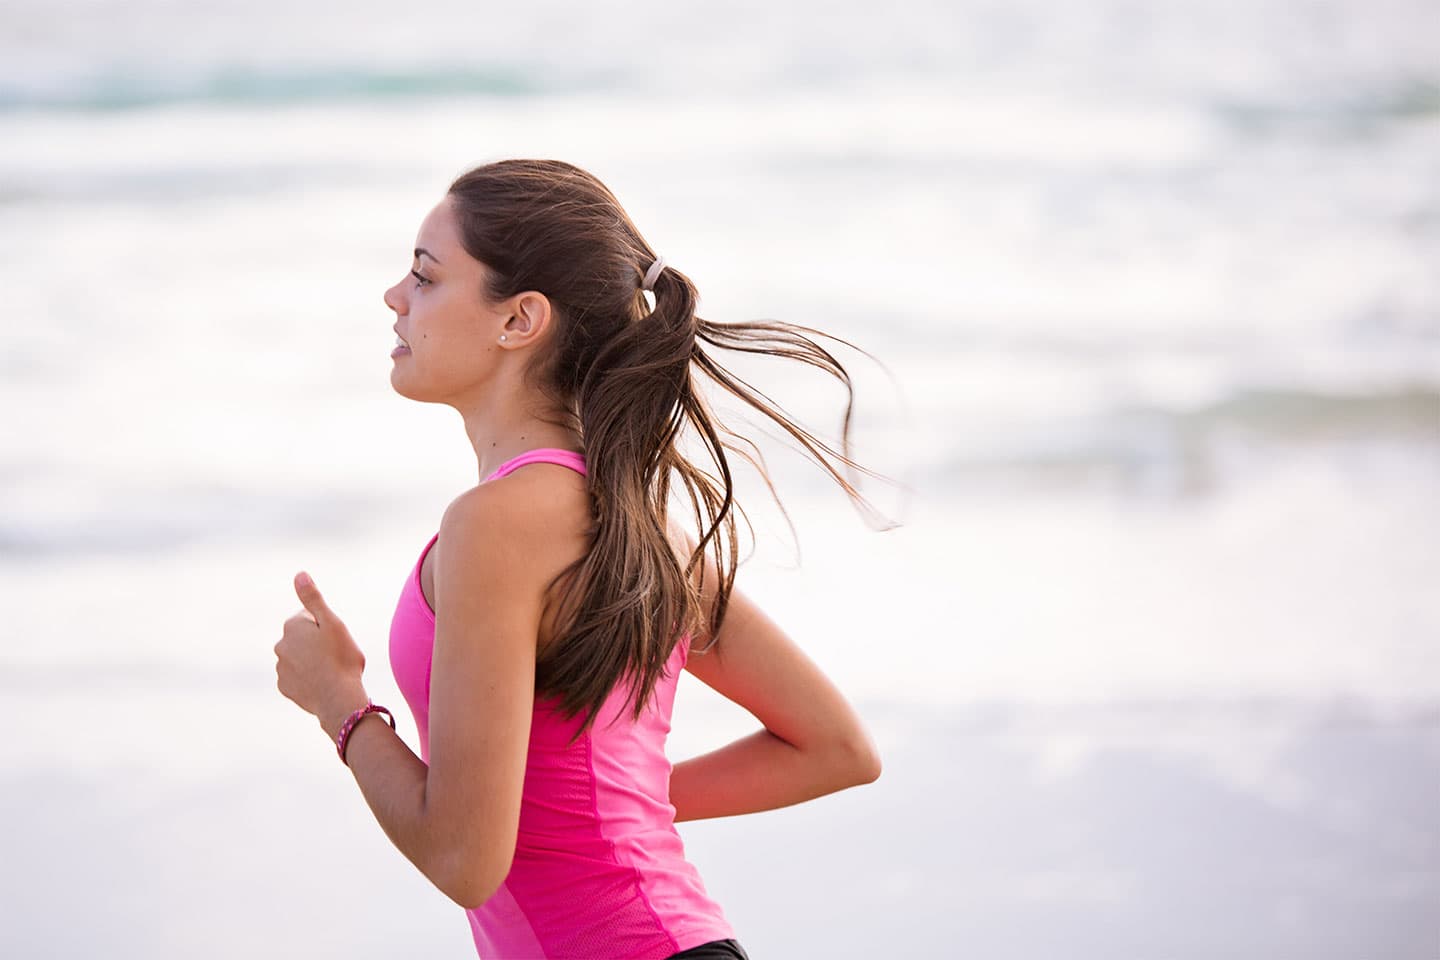 Woman with pony tail in pink tank top running on beach shore